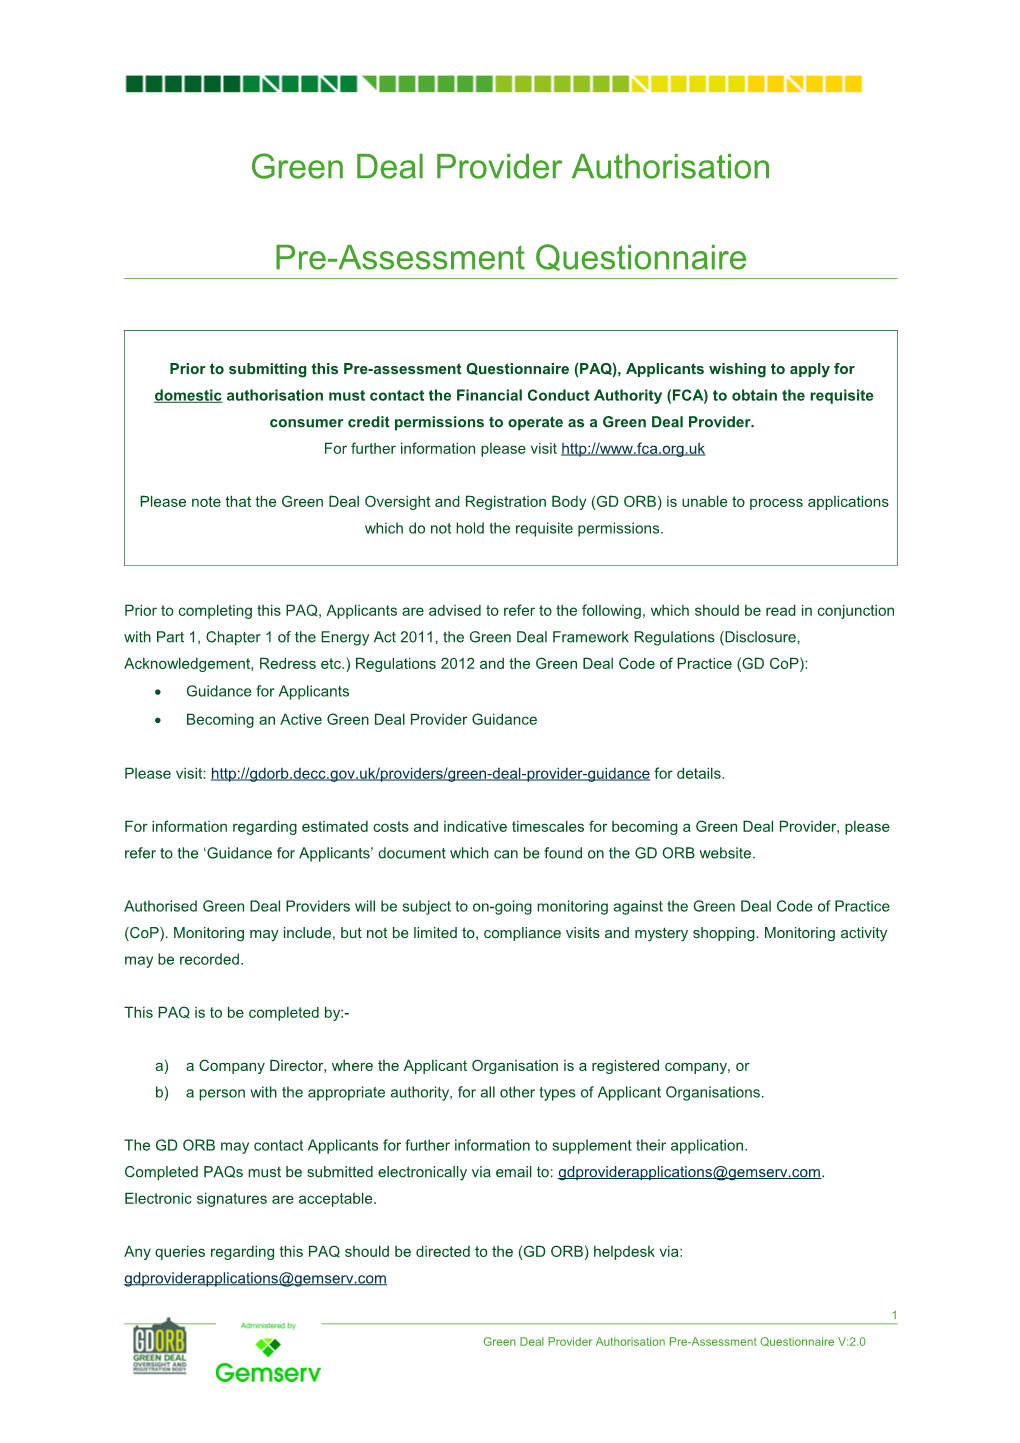 Prior to Submitting This Pre-Assessment Questionnaire (PAQ), Applicants Wishing to Apply For